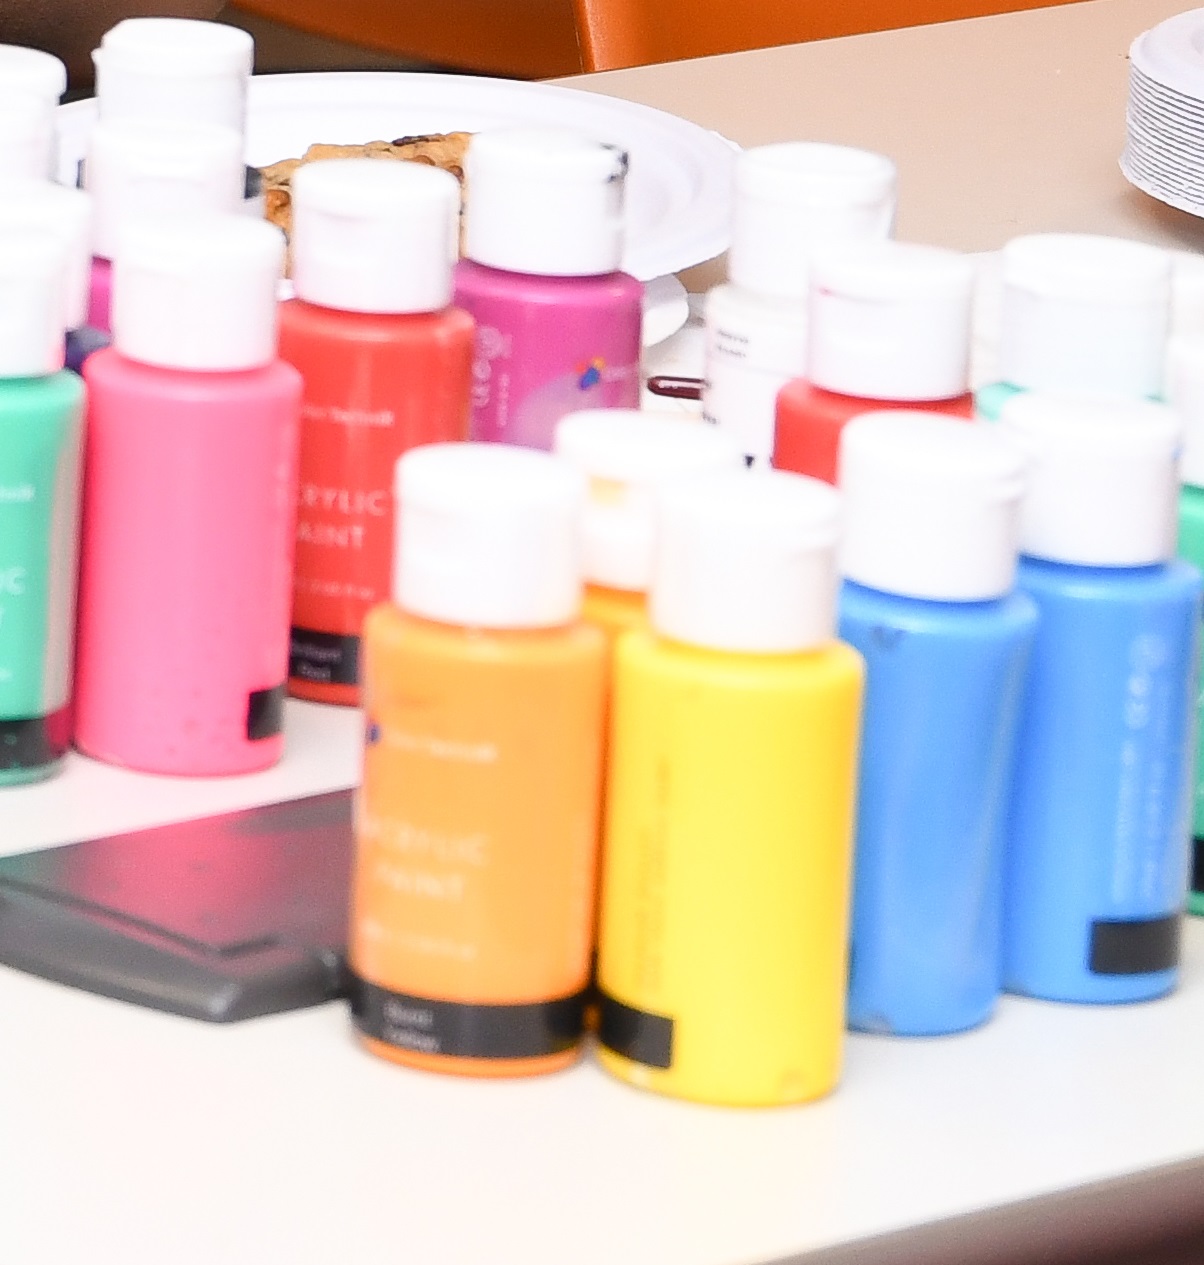 Small bottles of paint in various colors